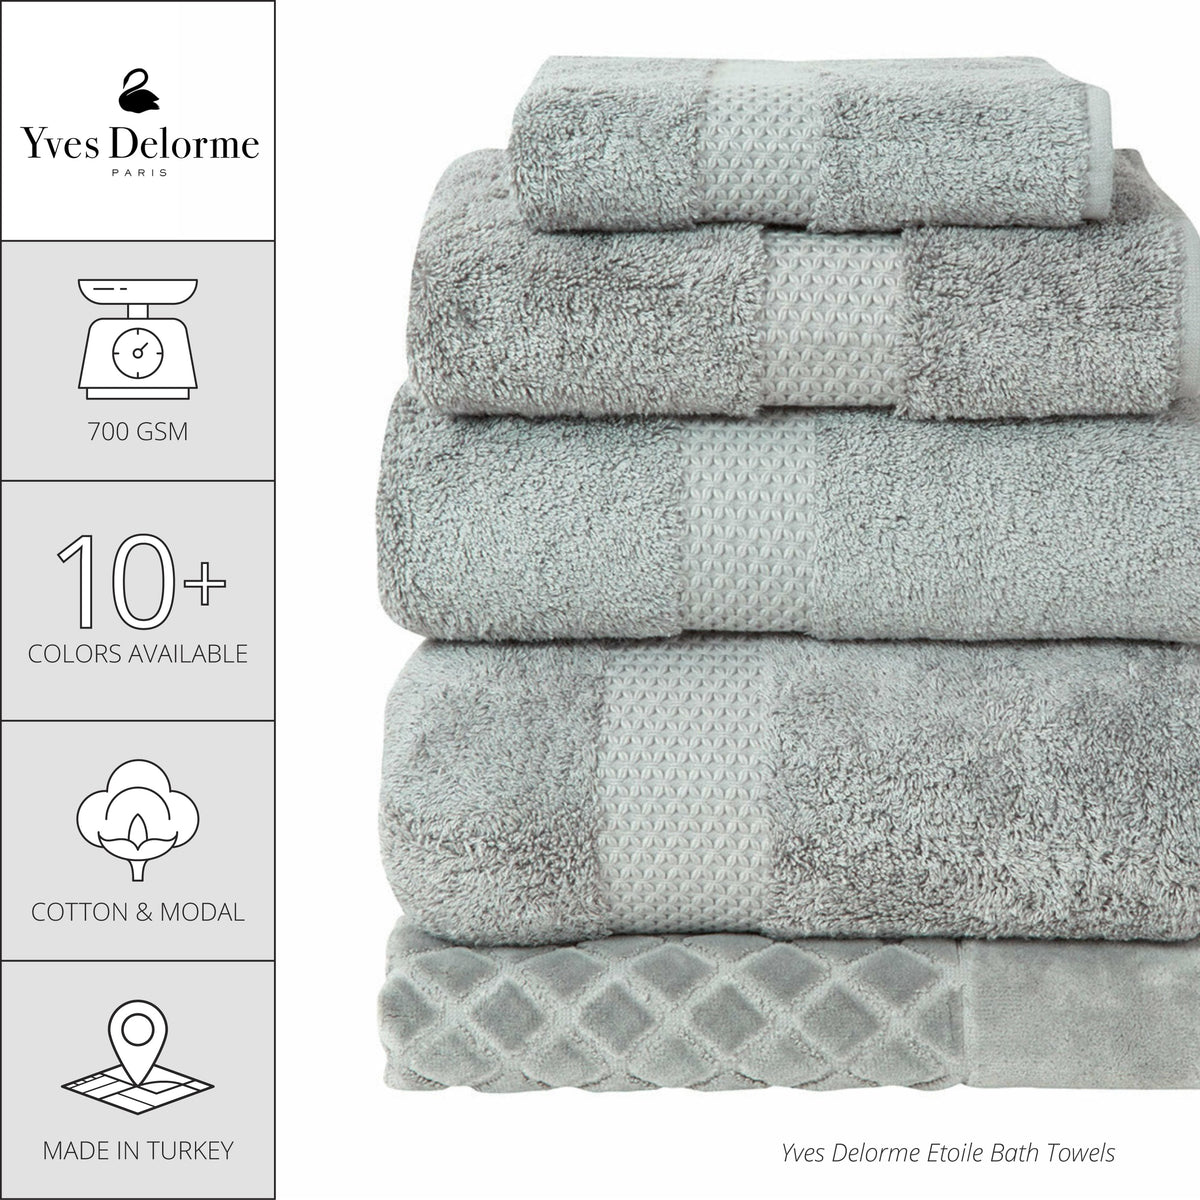 Yves Delorme Etoile Bath Towels and Mats - The Rose